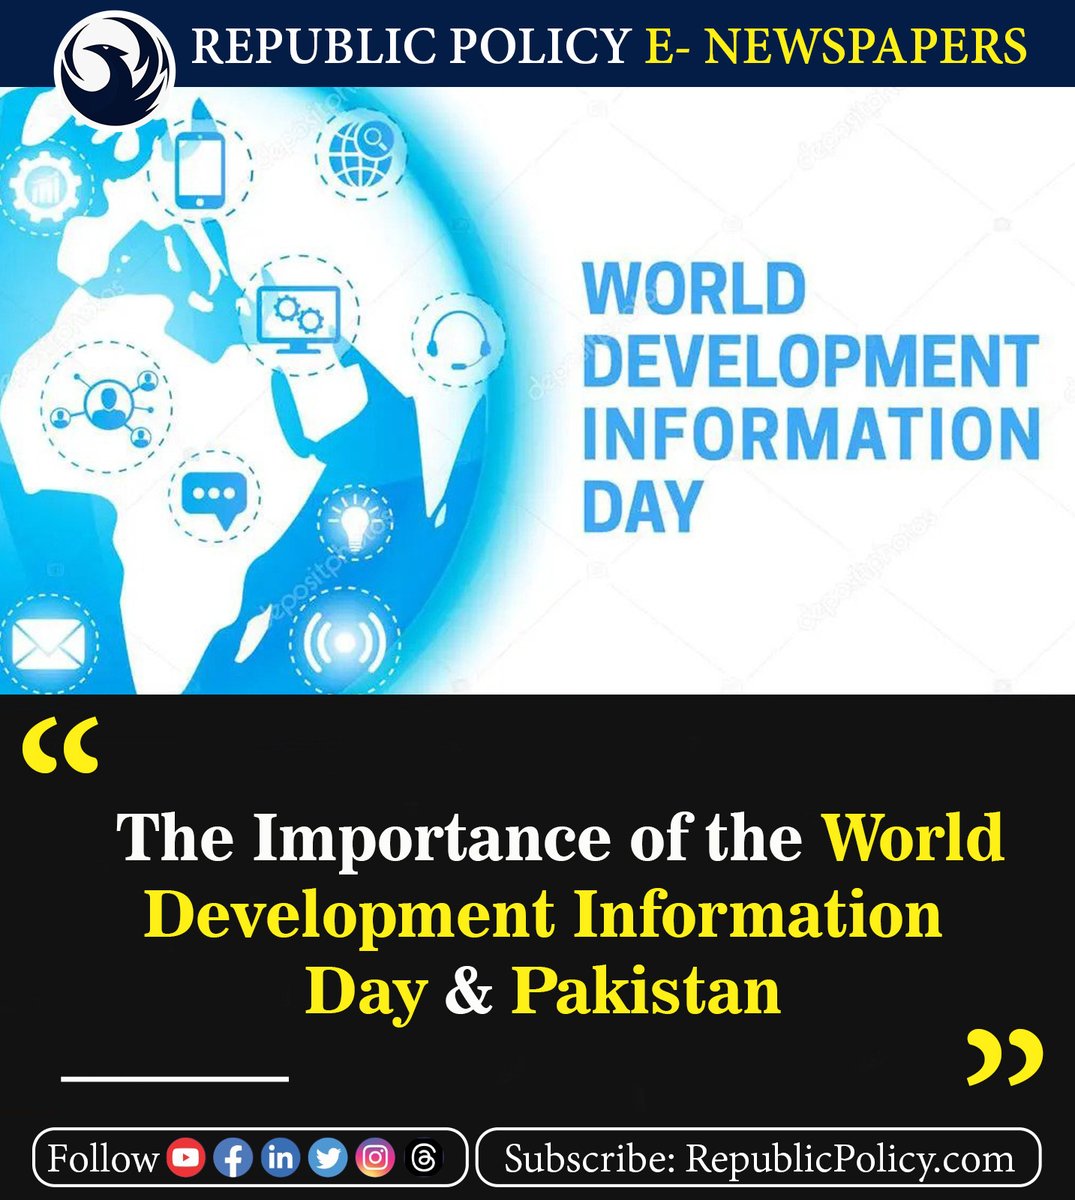 World Development Information Day is a day that was established by the United Nations in 1972 to raise awareness.

Read more: republicpolicy.com/the-importance…

#WorldDevelopmentInformationDay #GlobalAwareness #DevelopmentGoals #AwarenessDay #News